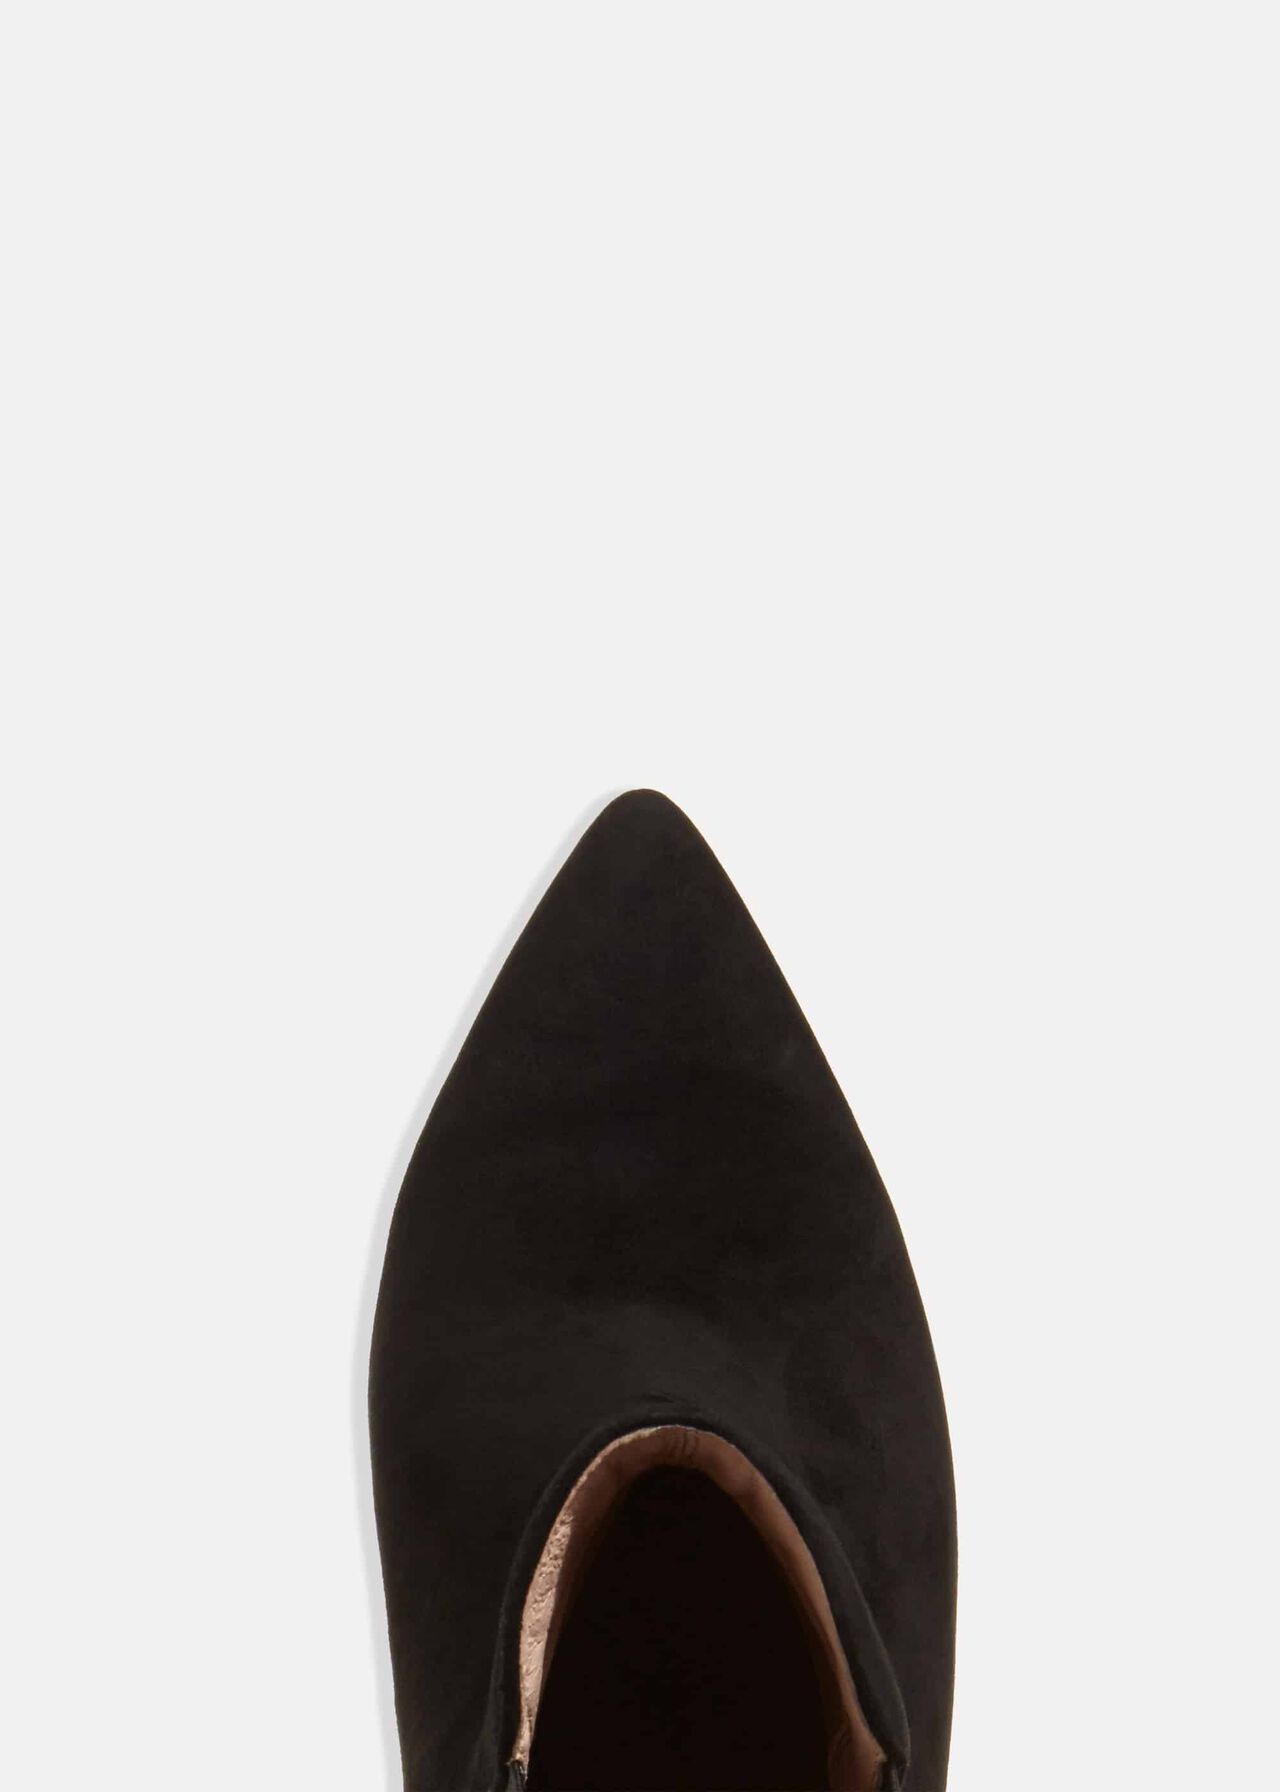 Esme Suede Ankle Boot